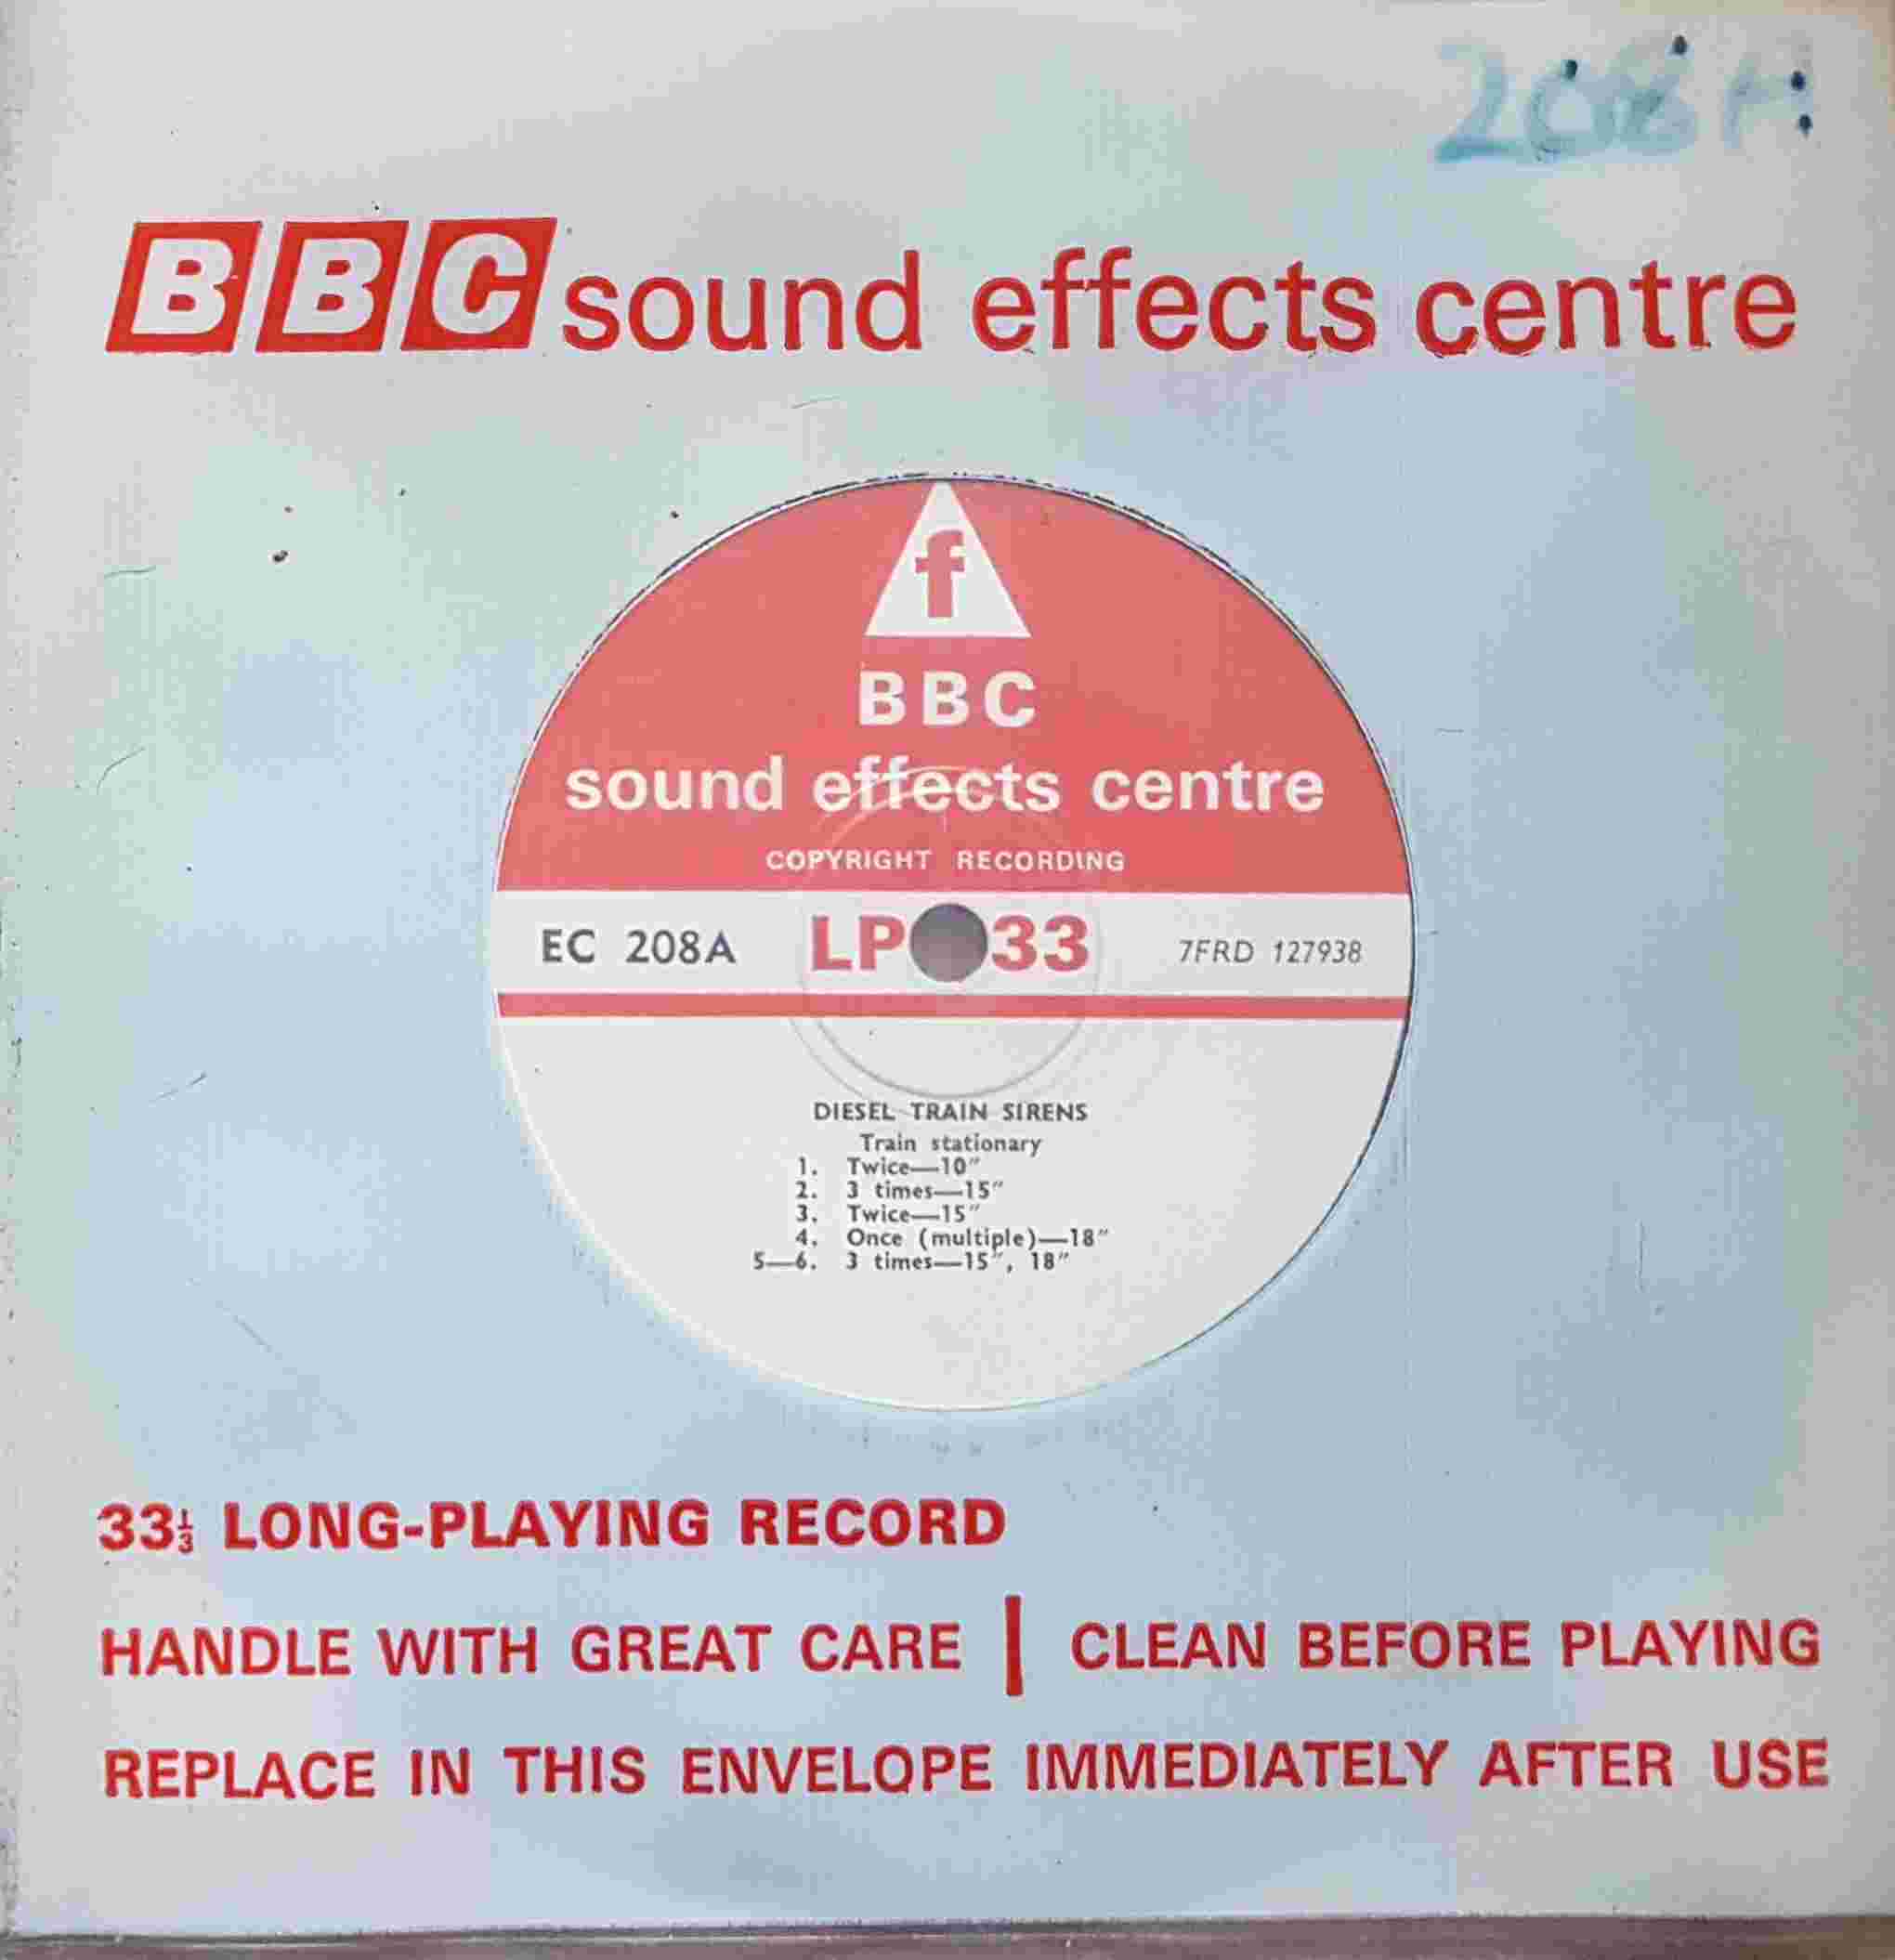 Picture of EC 208A Diesel train sirens / Trains by artist Not registered from the BBC singles - Records and Tapes library